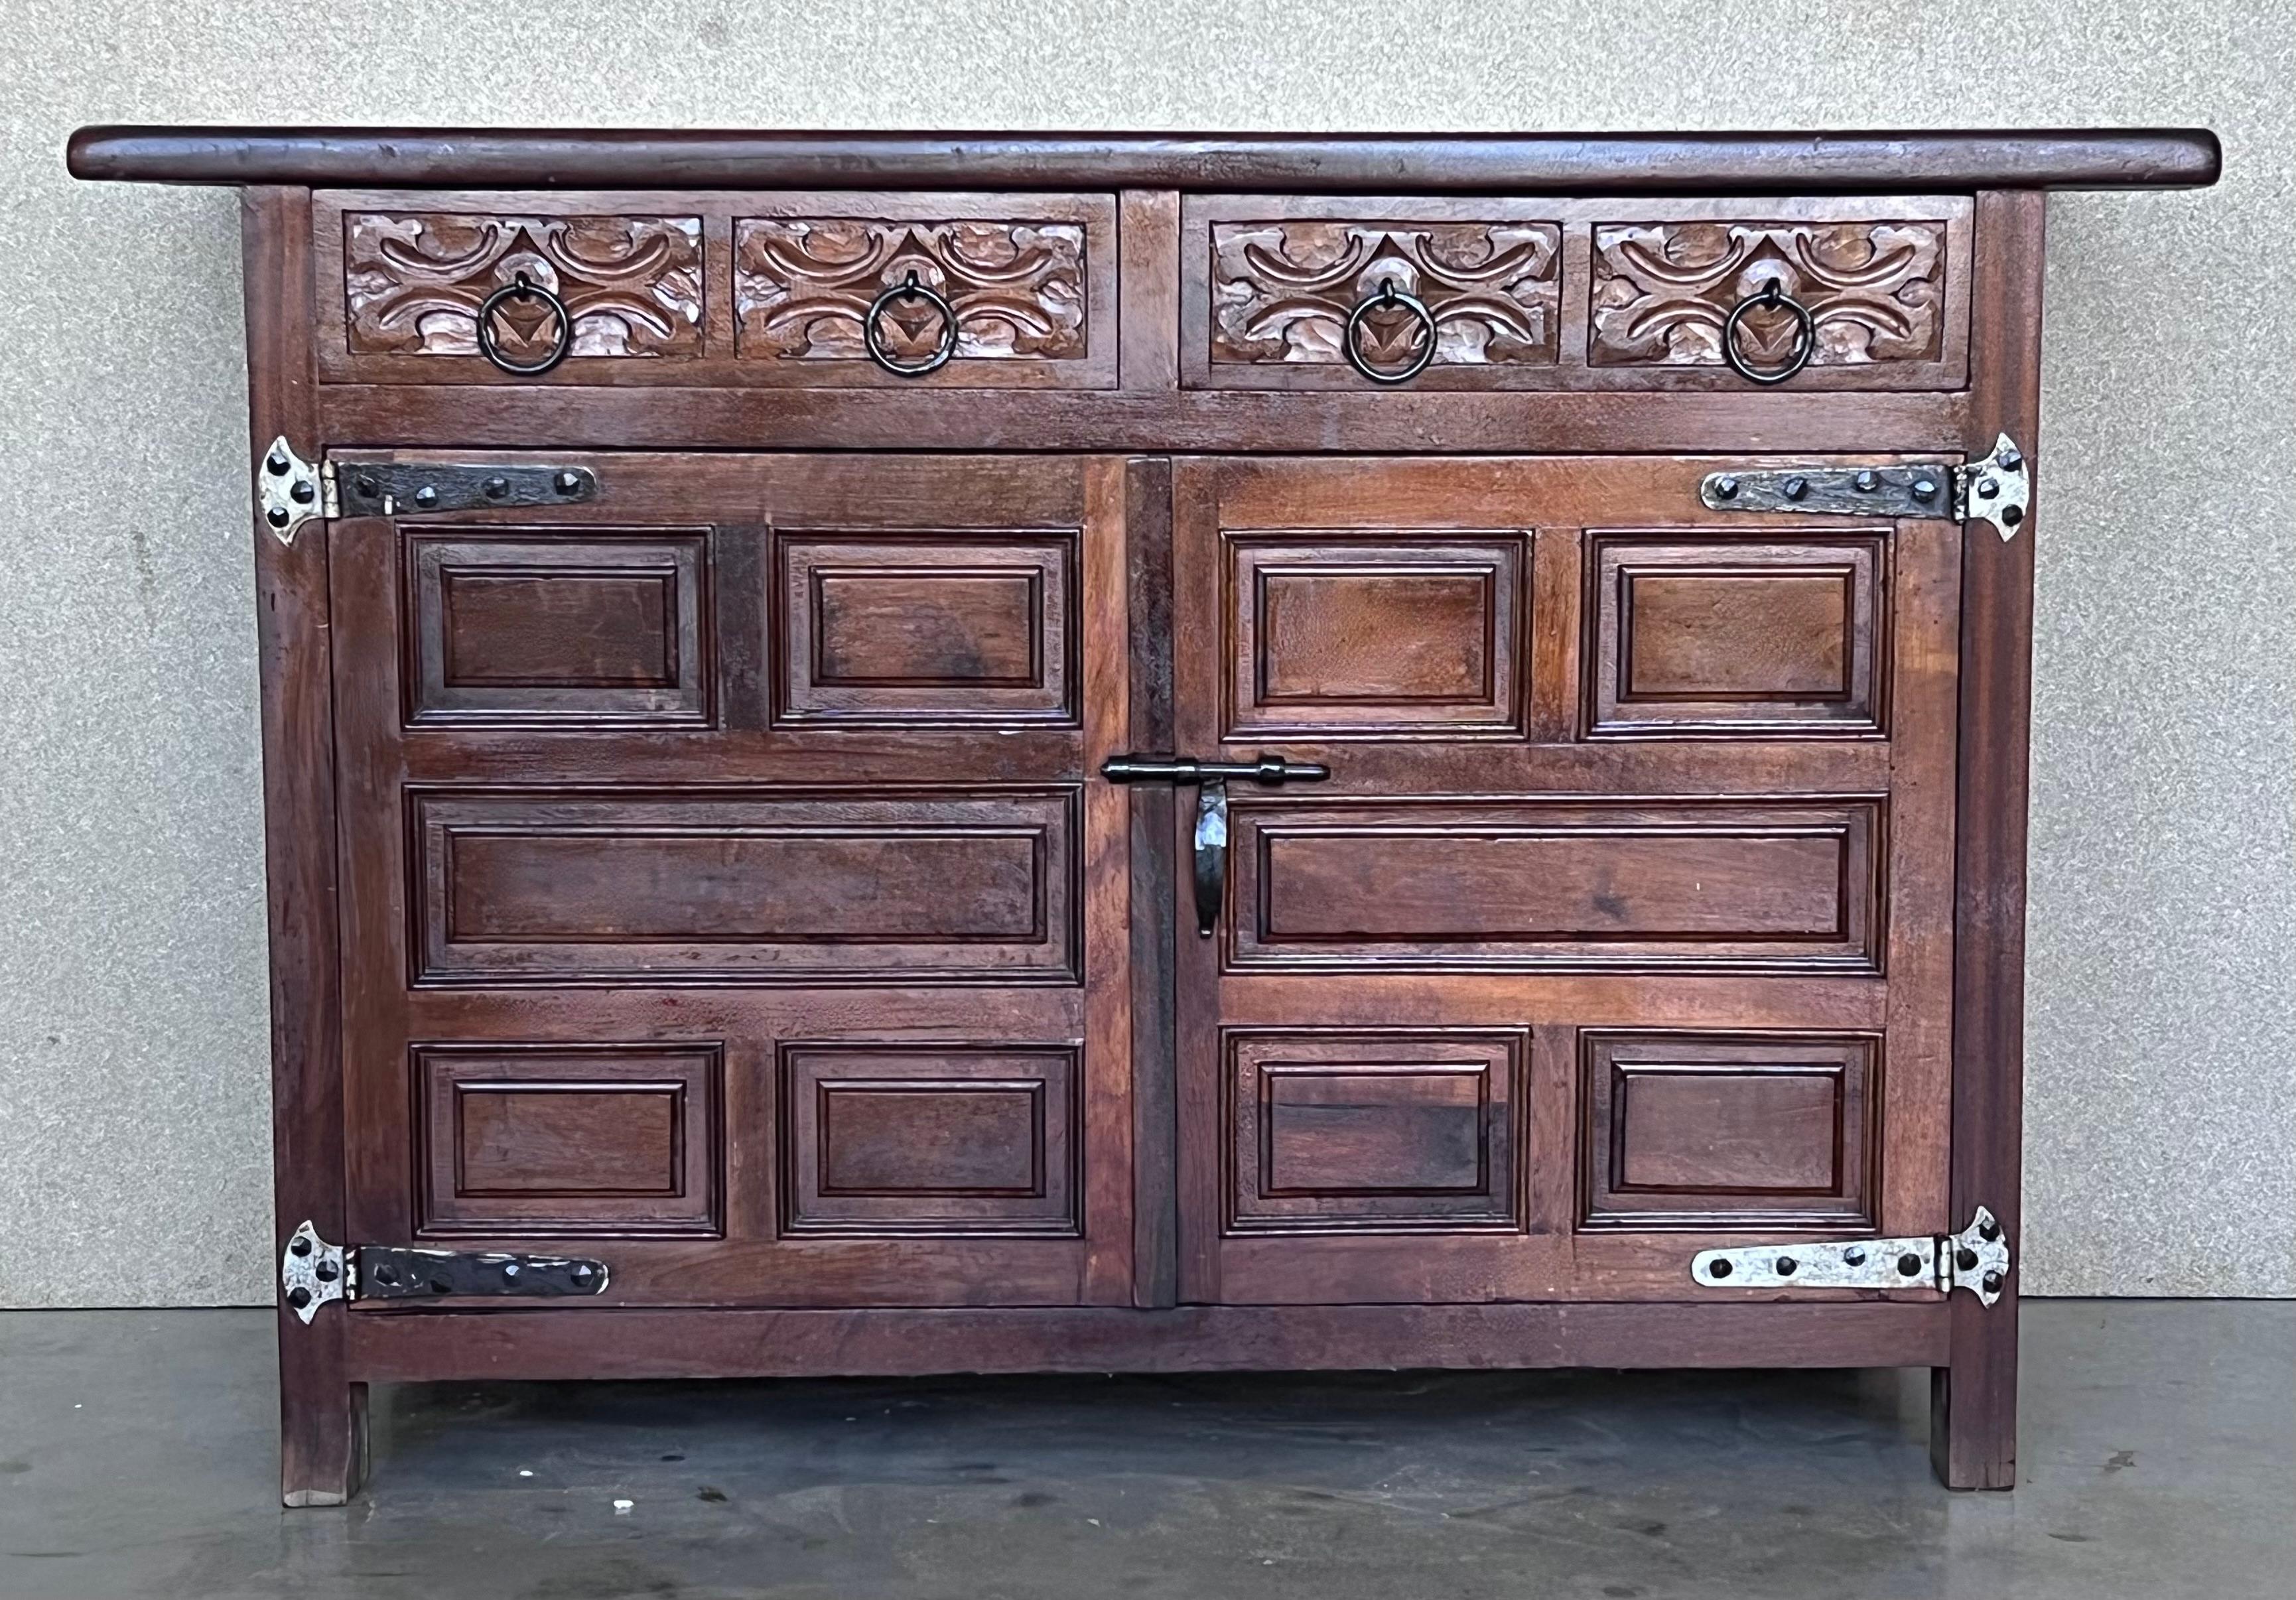 Spanish Colonial 20th Century Spanish Carved Walnut Tuscan Credenza or Buffet with Two Drawers For Sale